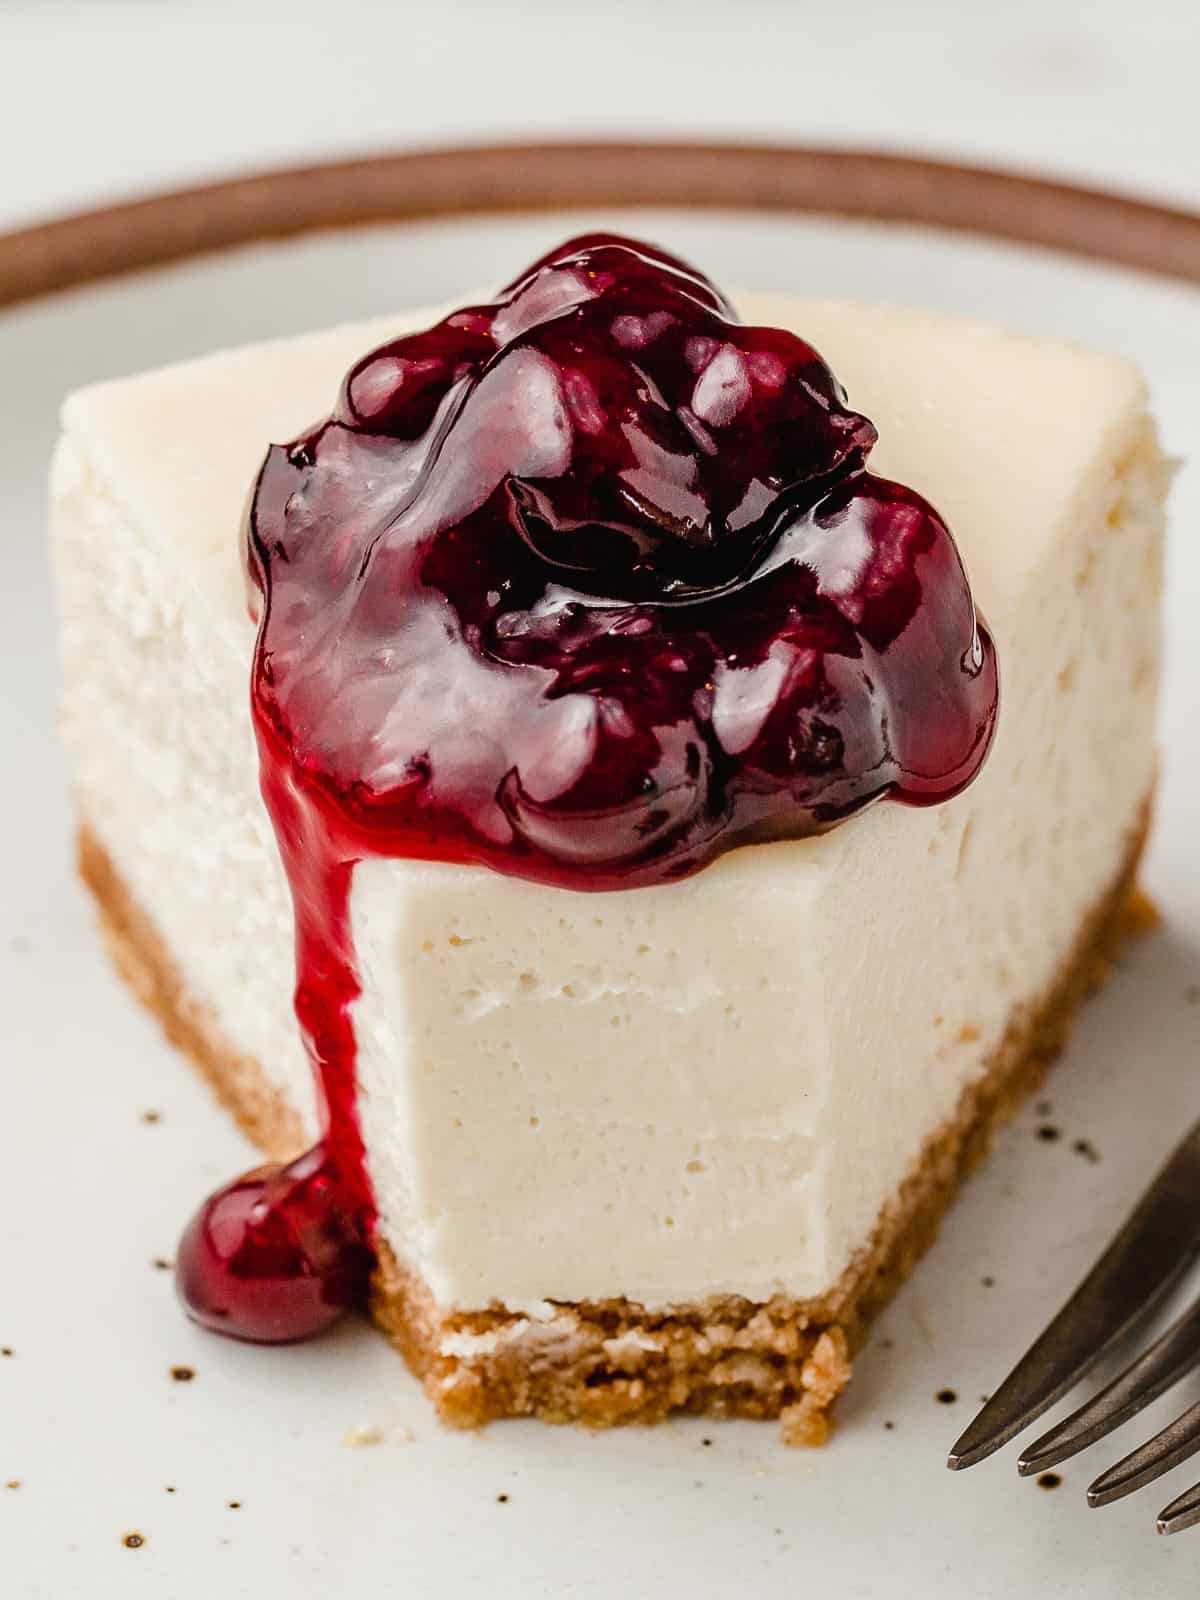 A slice of cheesecake with blueberry topping on a plate.